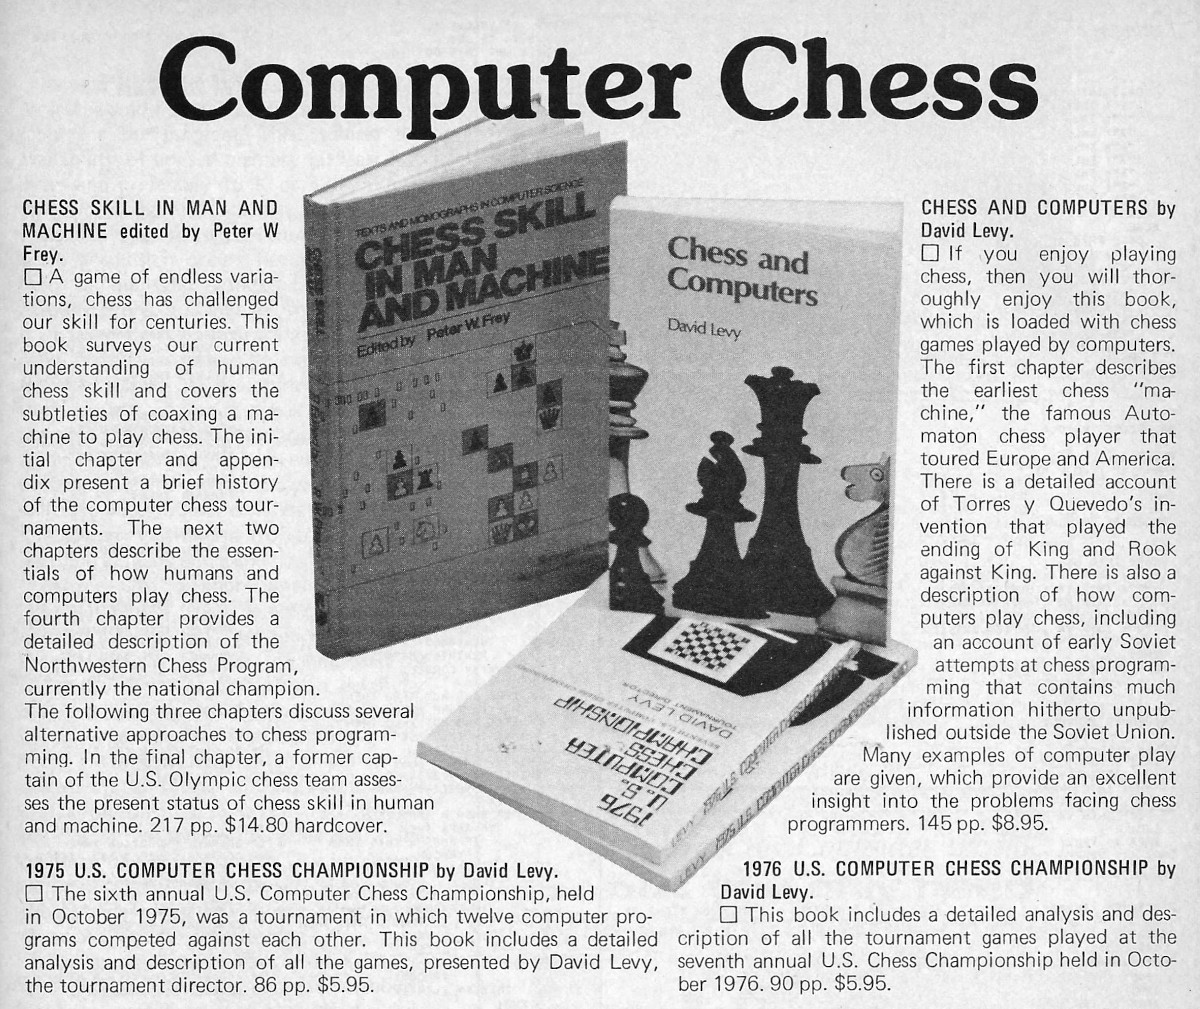 Some of David Levy's Computer Chess books, from a Bits Inc. advert, Byte, December 1978